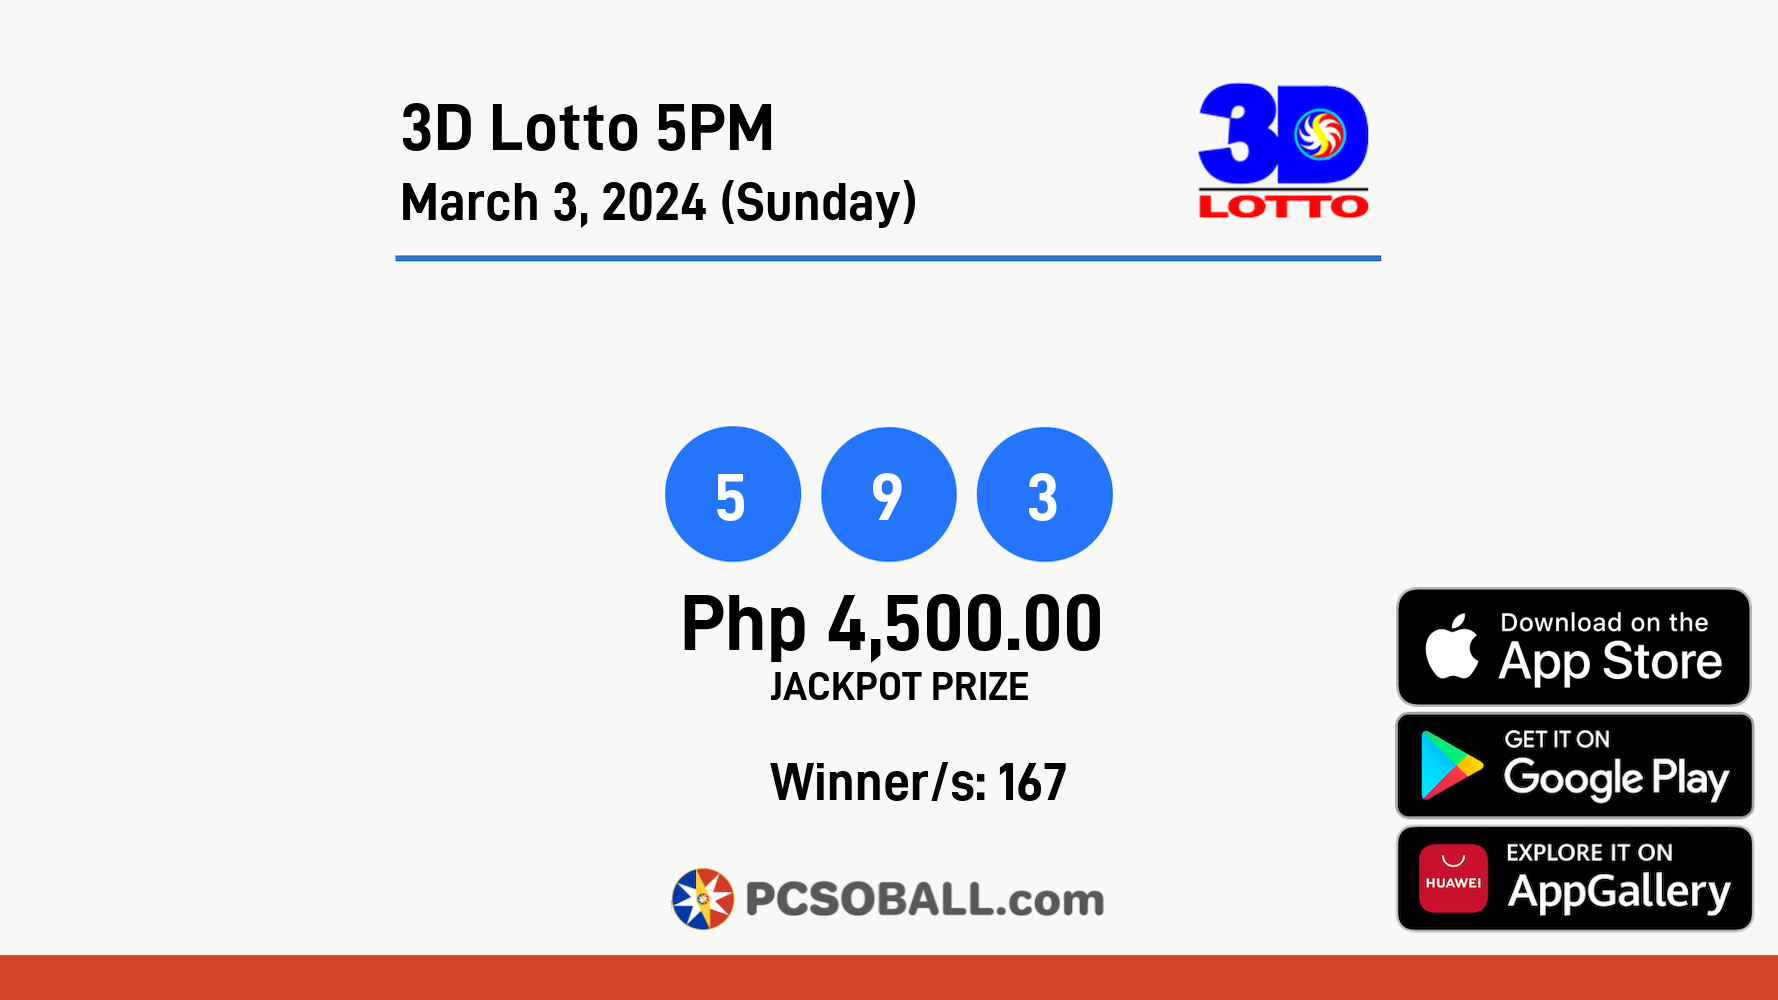 3D Lotto 5PM March 3, 2024 (Sunday) Result